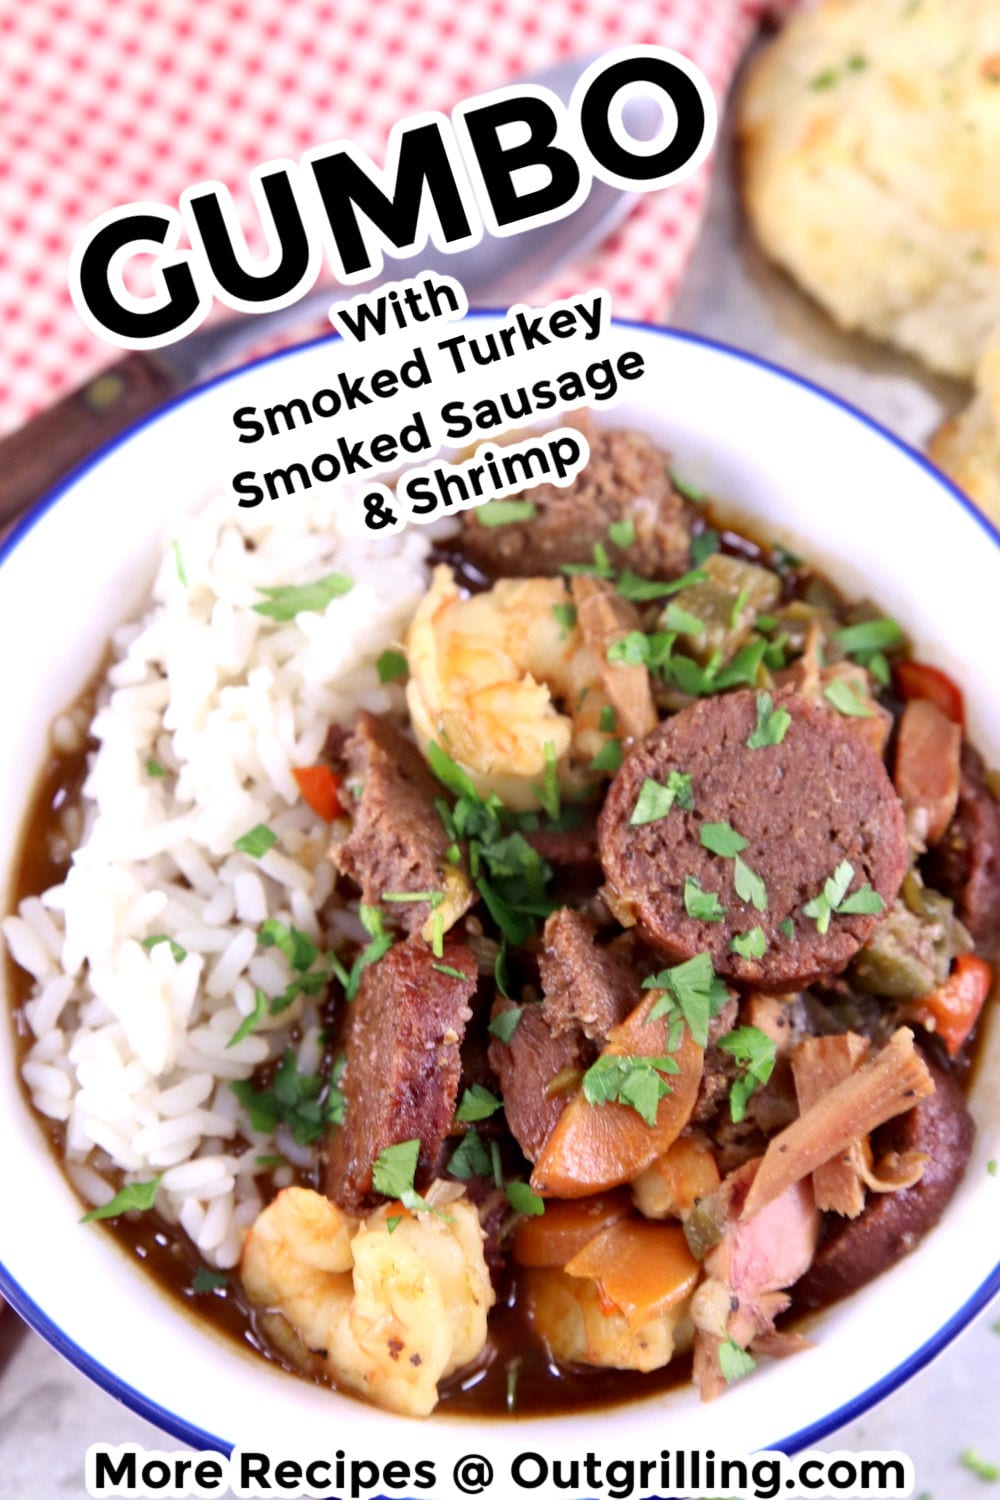 Bowl of smoked turkey gumbo with smoked sausage and shrimp. Served over rice.